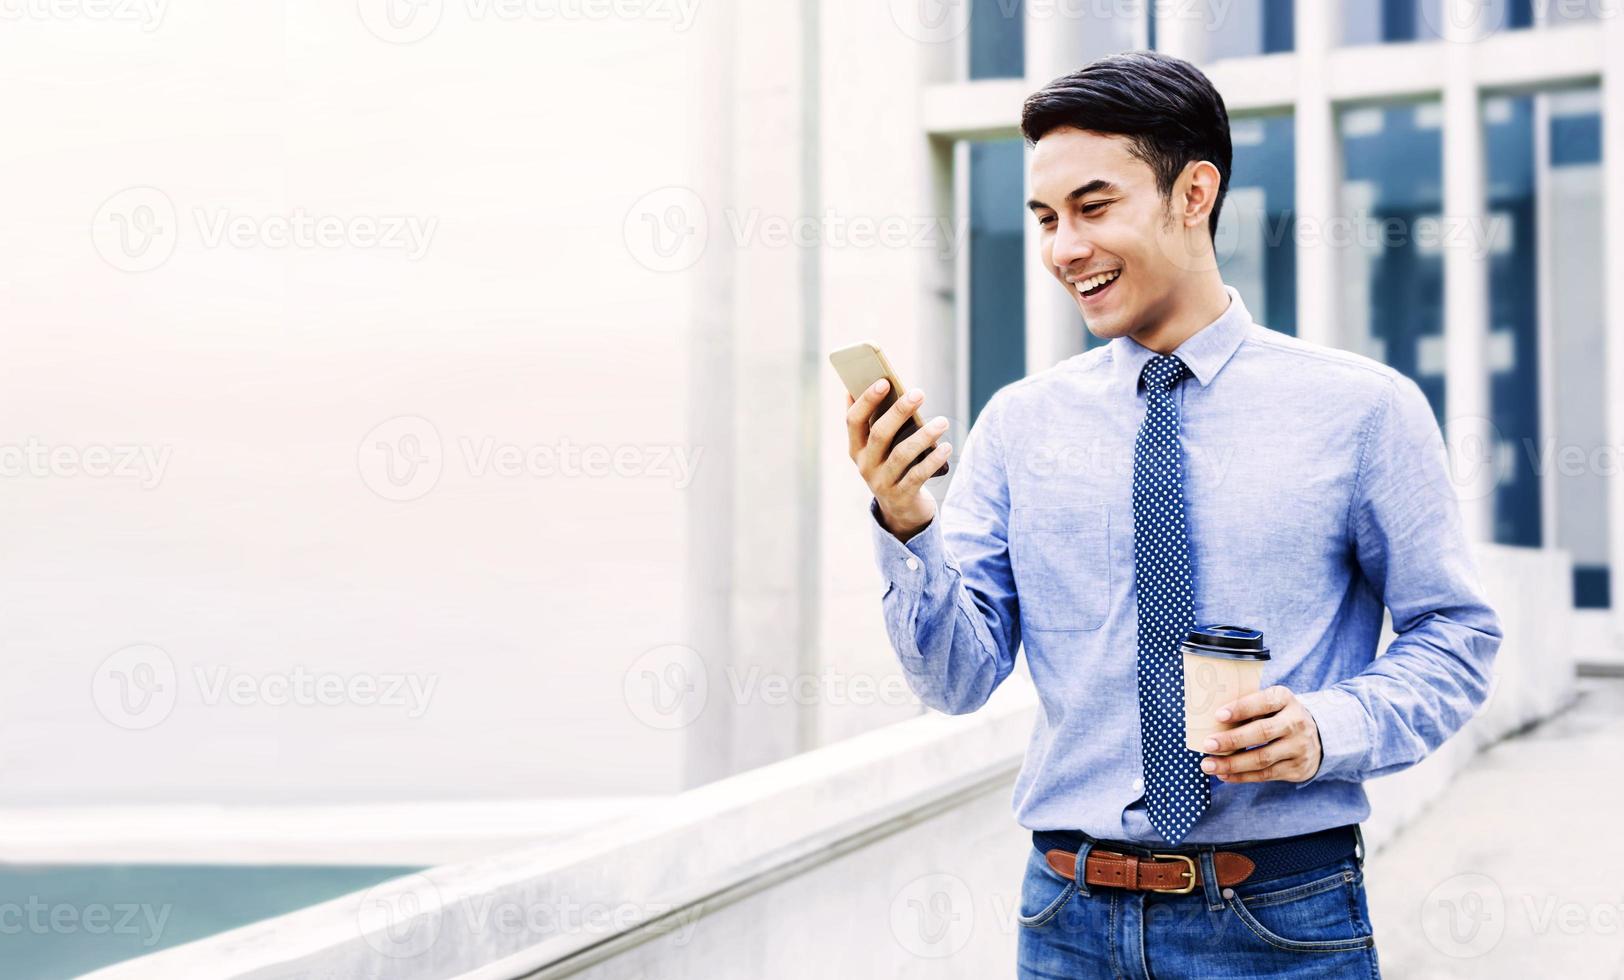 Smiling Young Asian Businessman Using Mobile Phone in the City. Modern Urban Lifestyle. Male Portrait. Hand holding Coffee Cup. looking at Smartphone photo